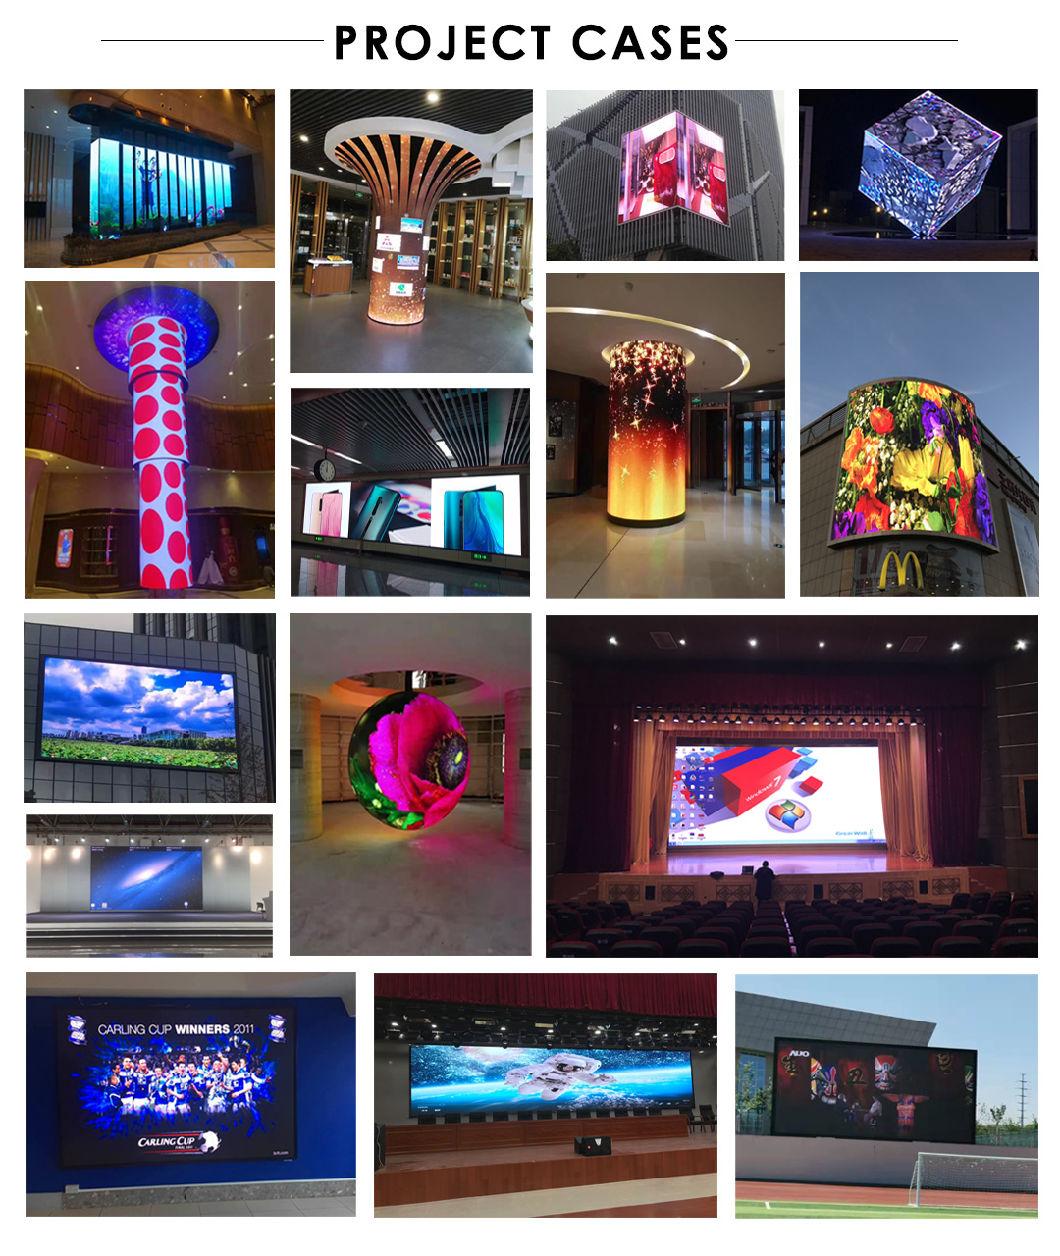 High Bright Transparent LED Display Screen Indoor and Outdoor Display Video Wall 3.91-7.81mm